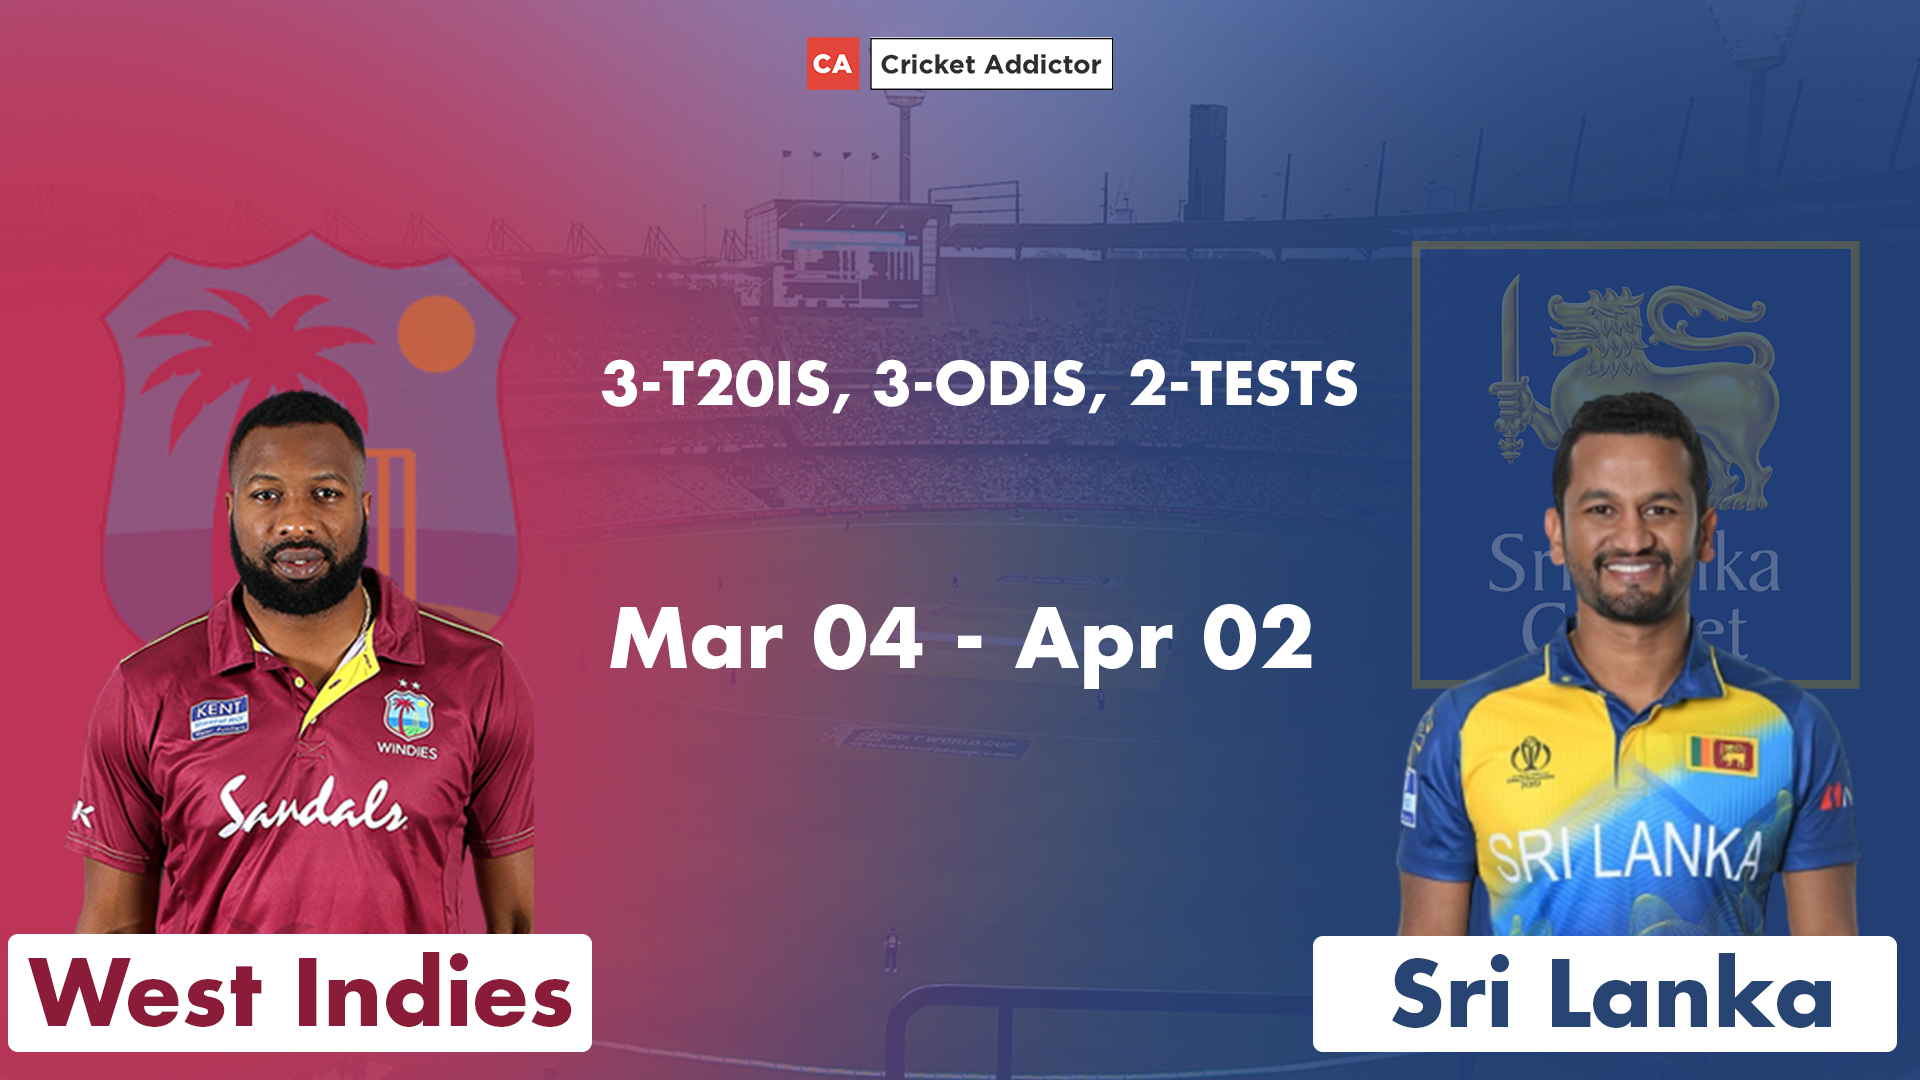 West Indies vs Sri Lanka 2021: Complete Schedule, Venues, Complete Squads, Distribution Of Points, Live Streaming Details And Everything You Need To Know